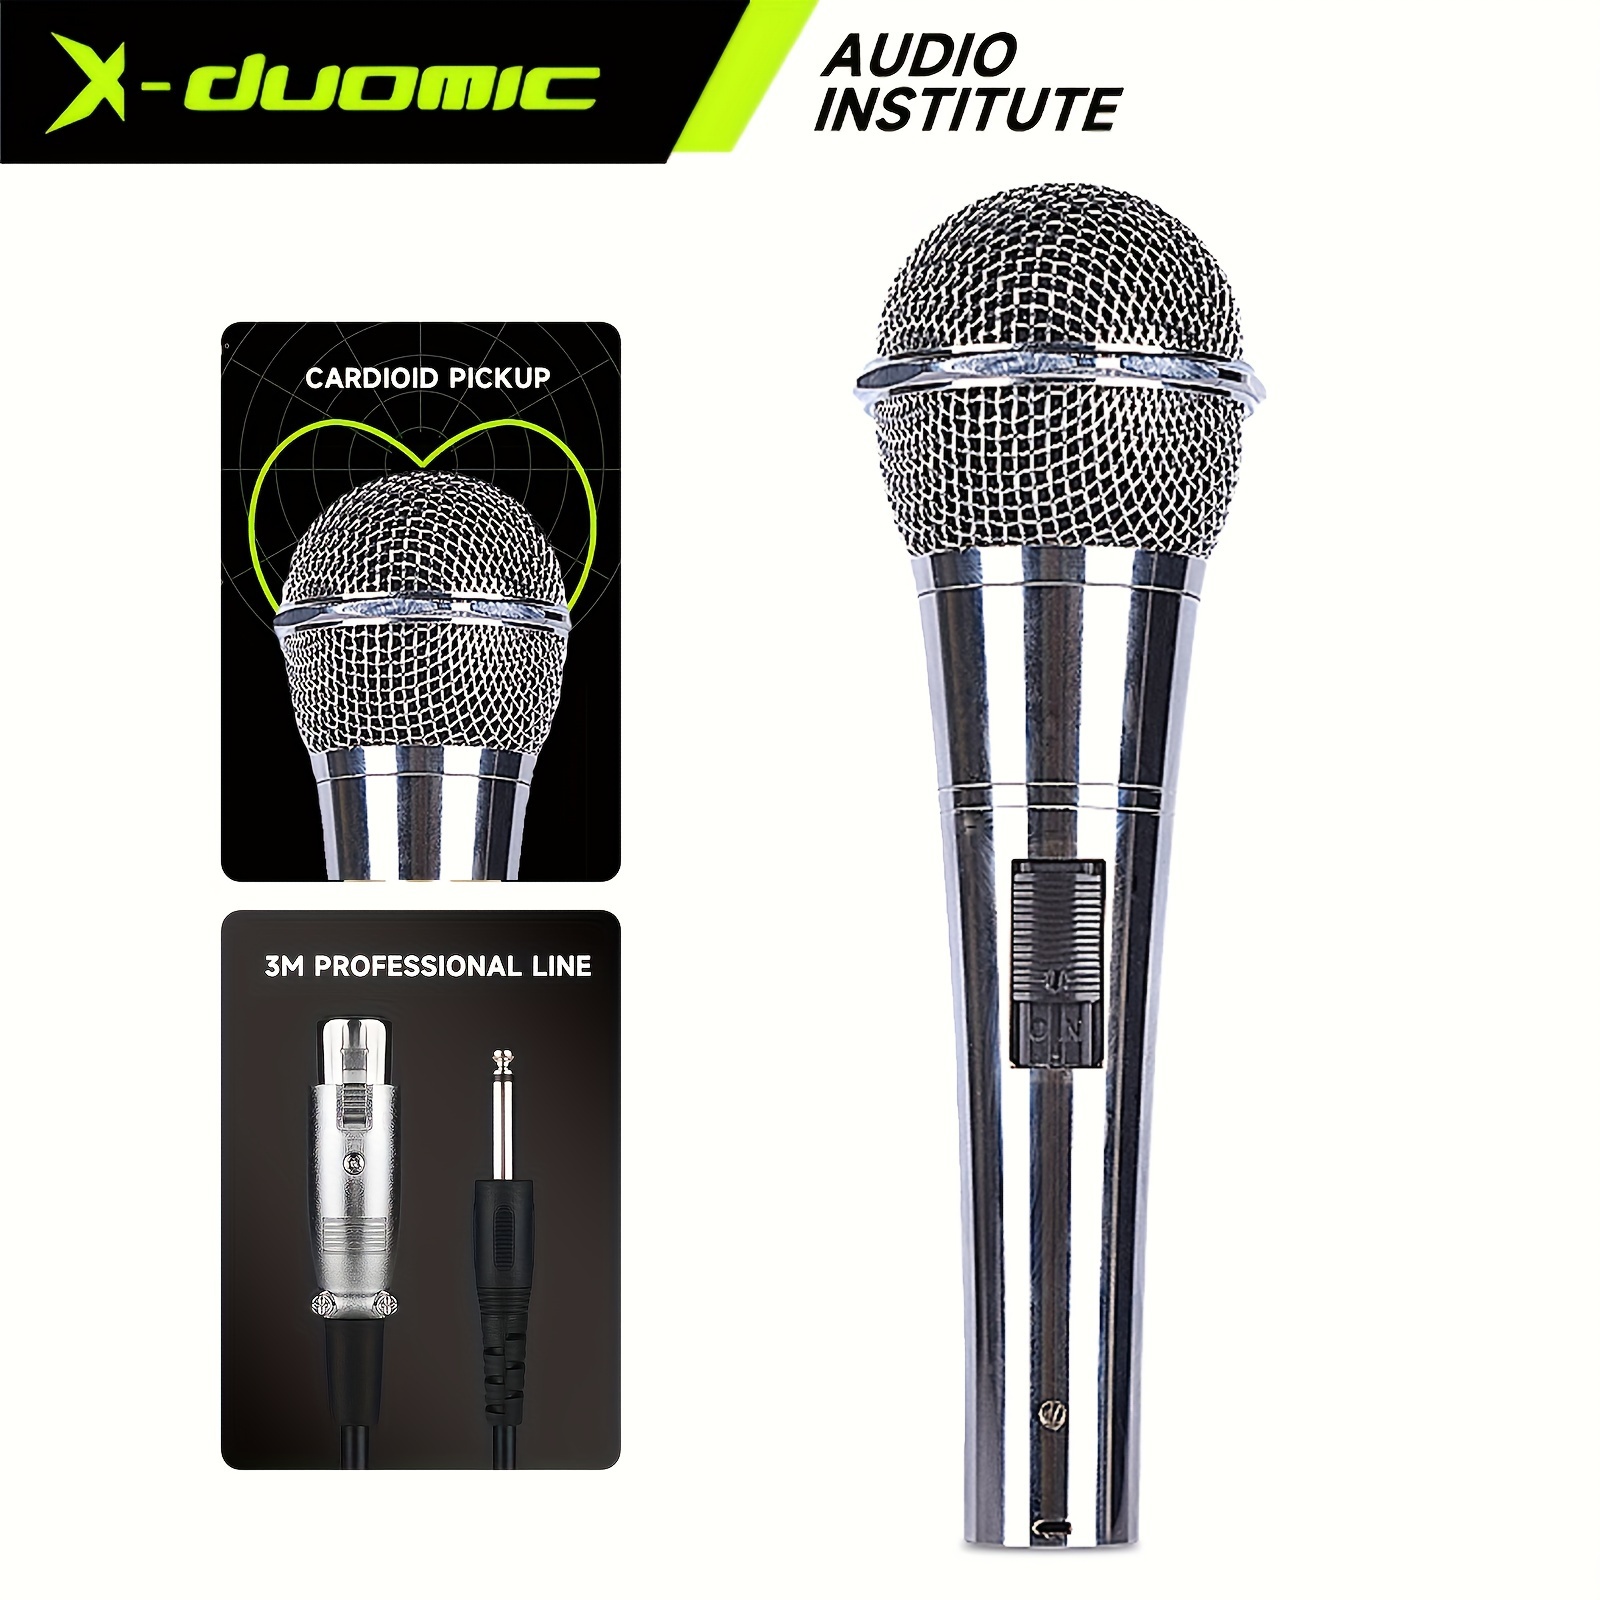 Mini Microphone,Singing Mic Equipment,Beautiful Vocal Quality,Mini Type  Space Saving,Metal Frothing Process,3.5mm Audio Connector,Suitable for  Laptop